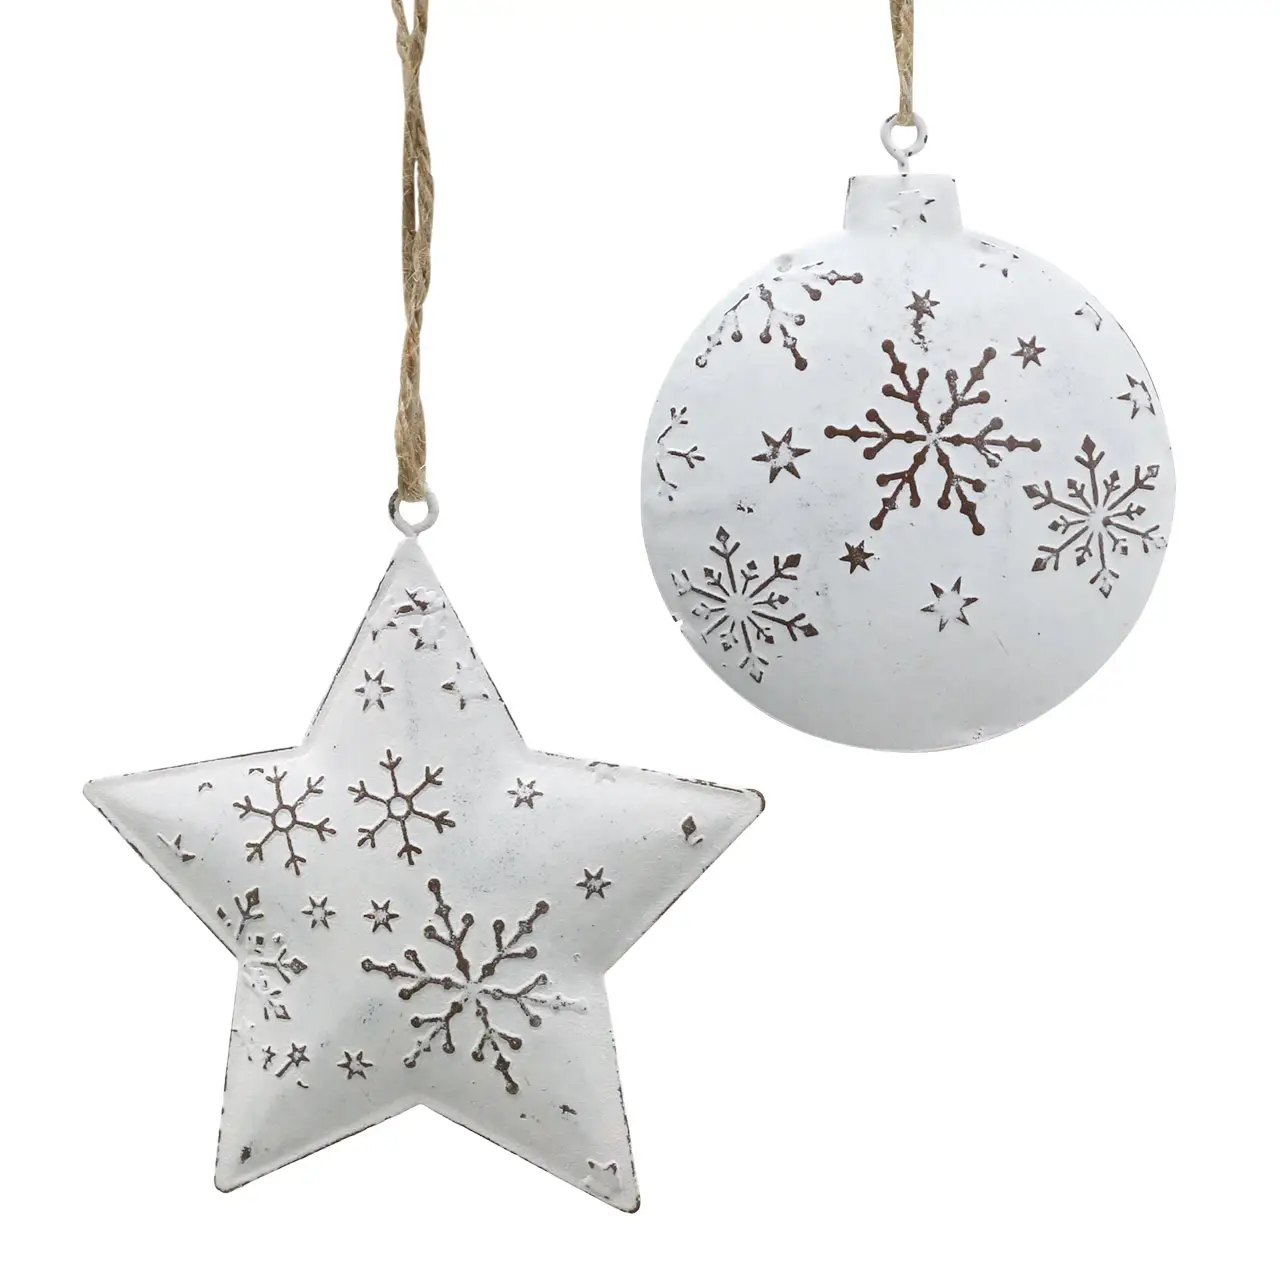 High quality Handmade metal Decorative hanger star and Christmas tree ball with snowflakes metal white for home and garden decor